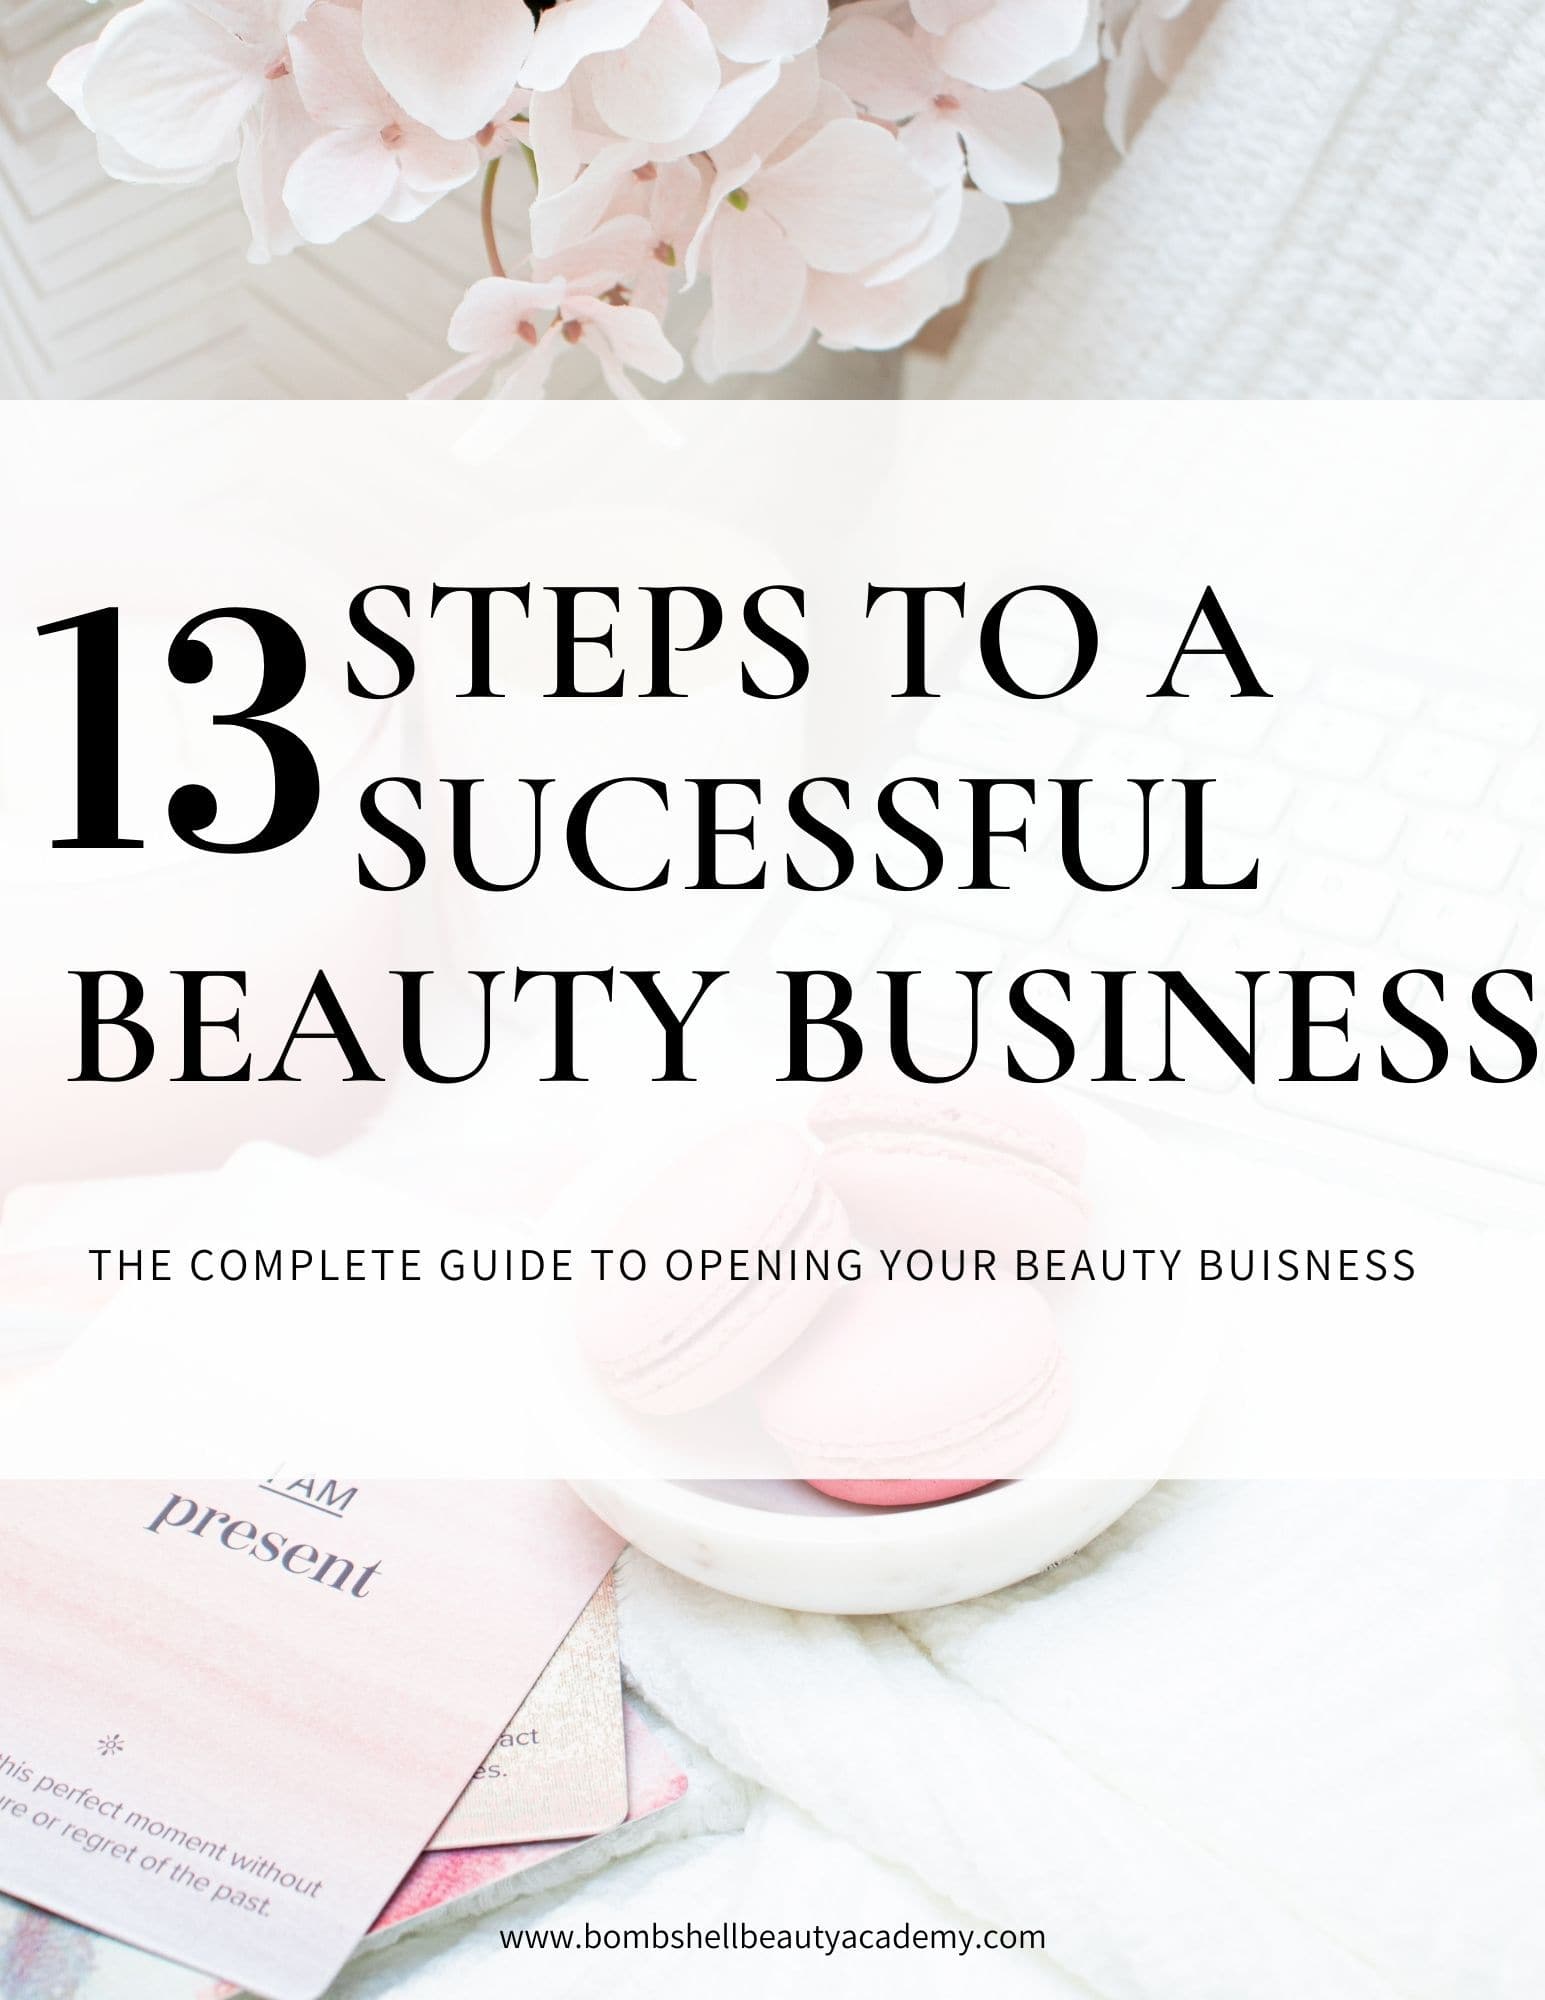 13 Steps To A Successful Beauty Business E-Book - Makeup and Beauty Courses Online